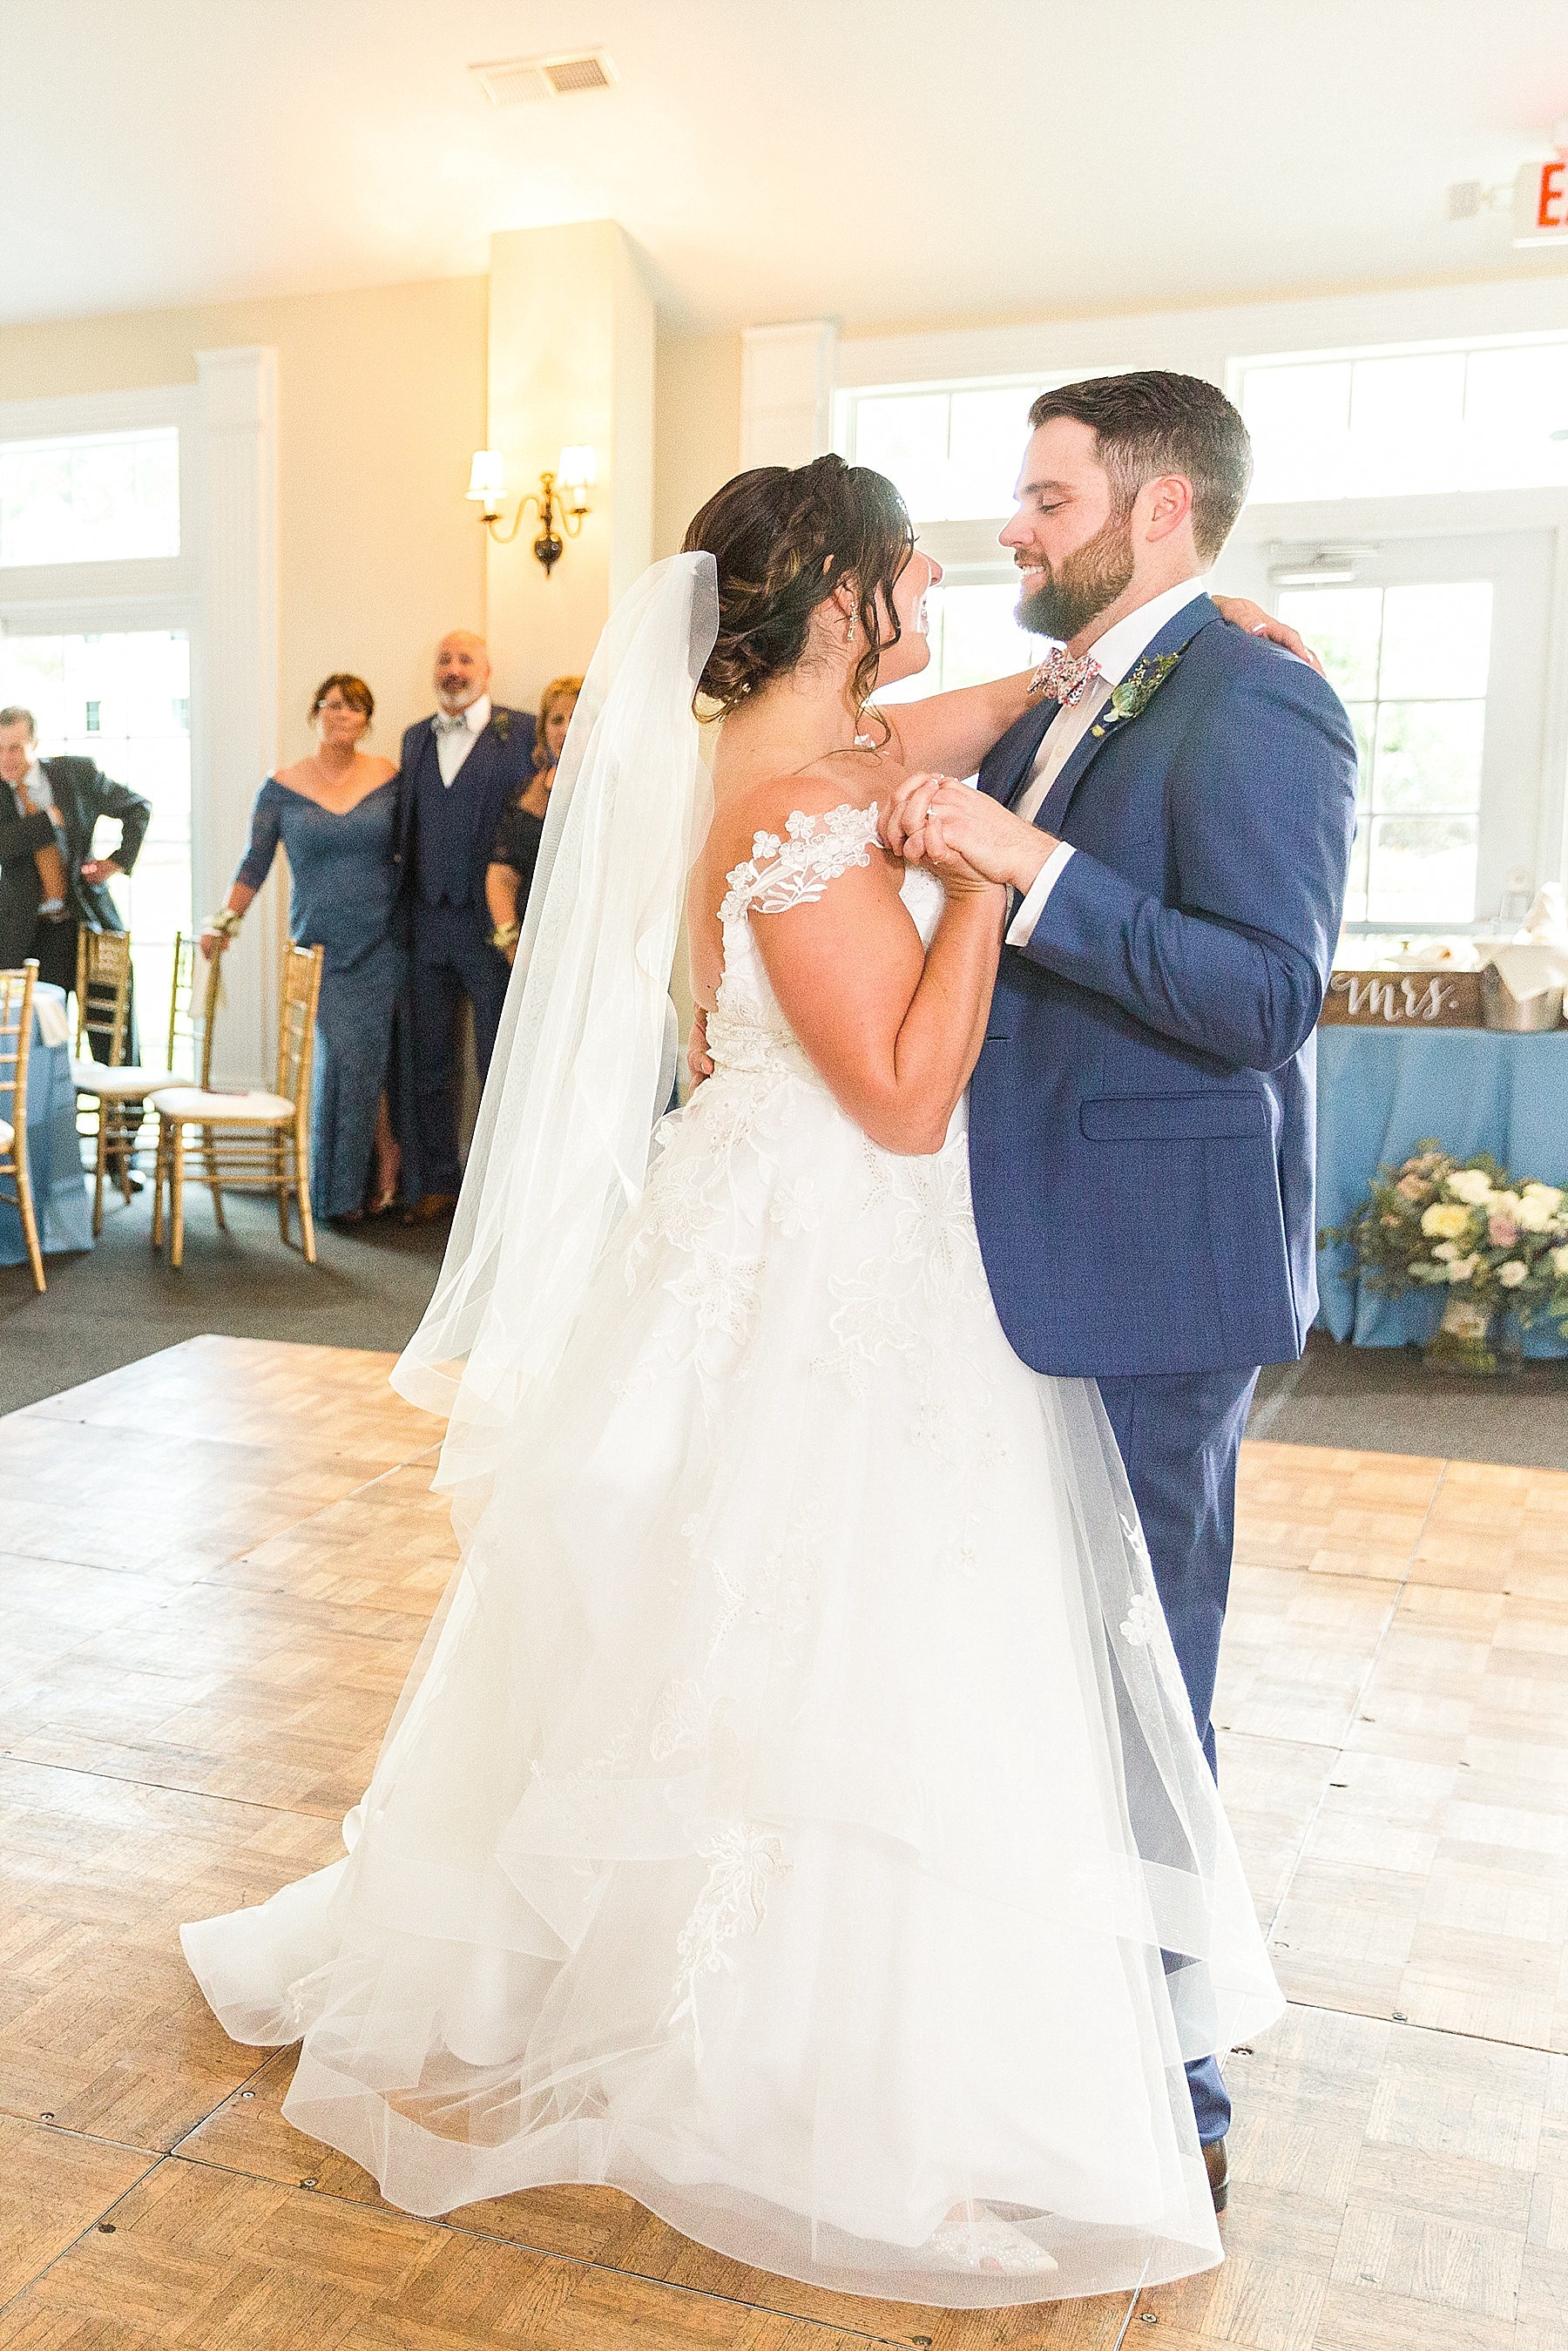 first dance as newlyweds photographed by Alexandra Mandato Photography